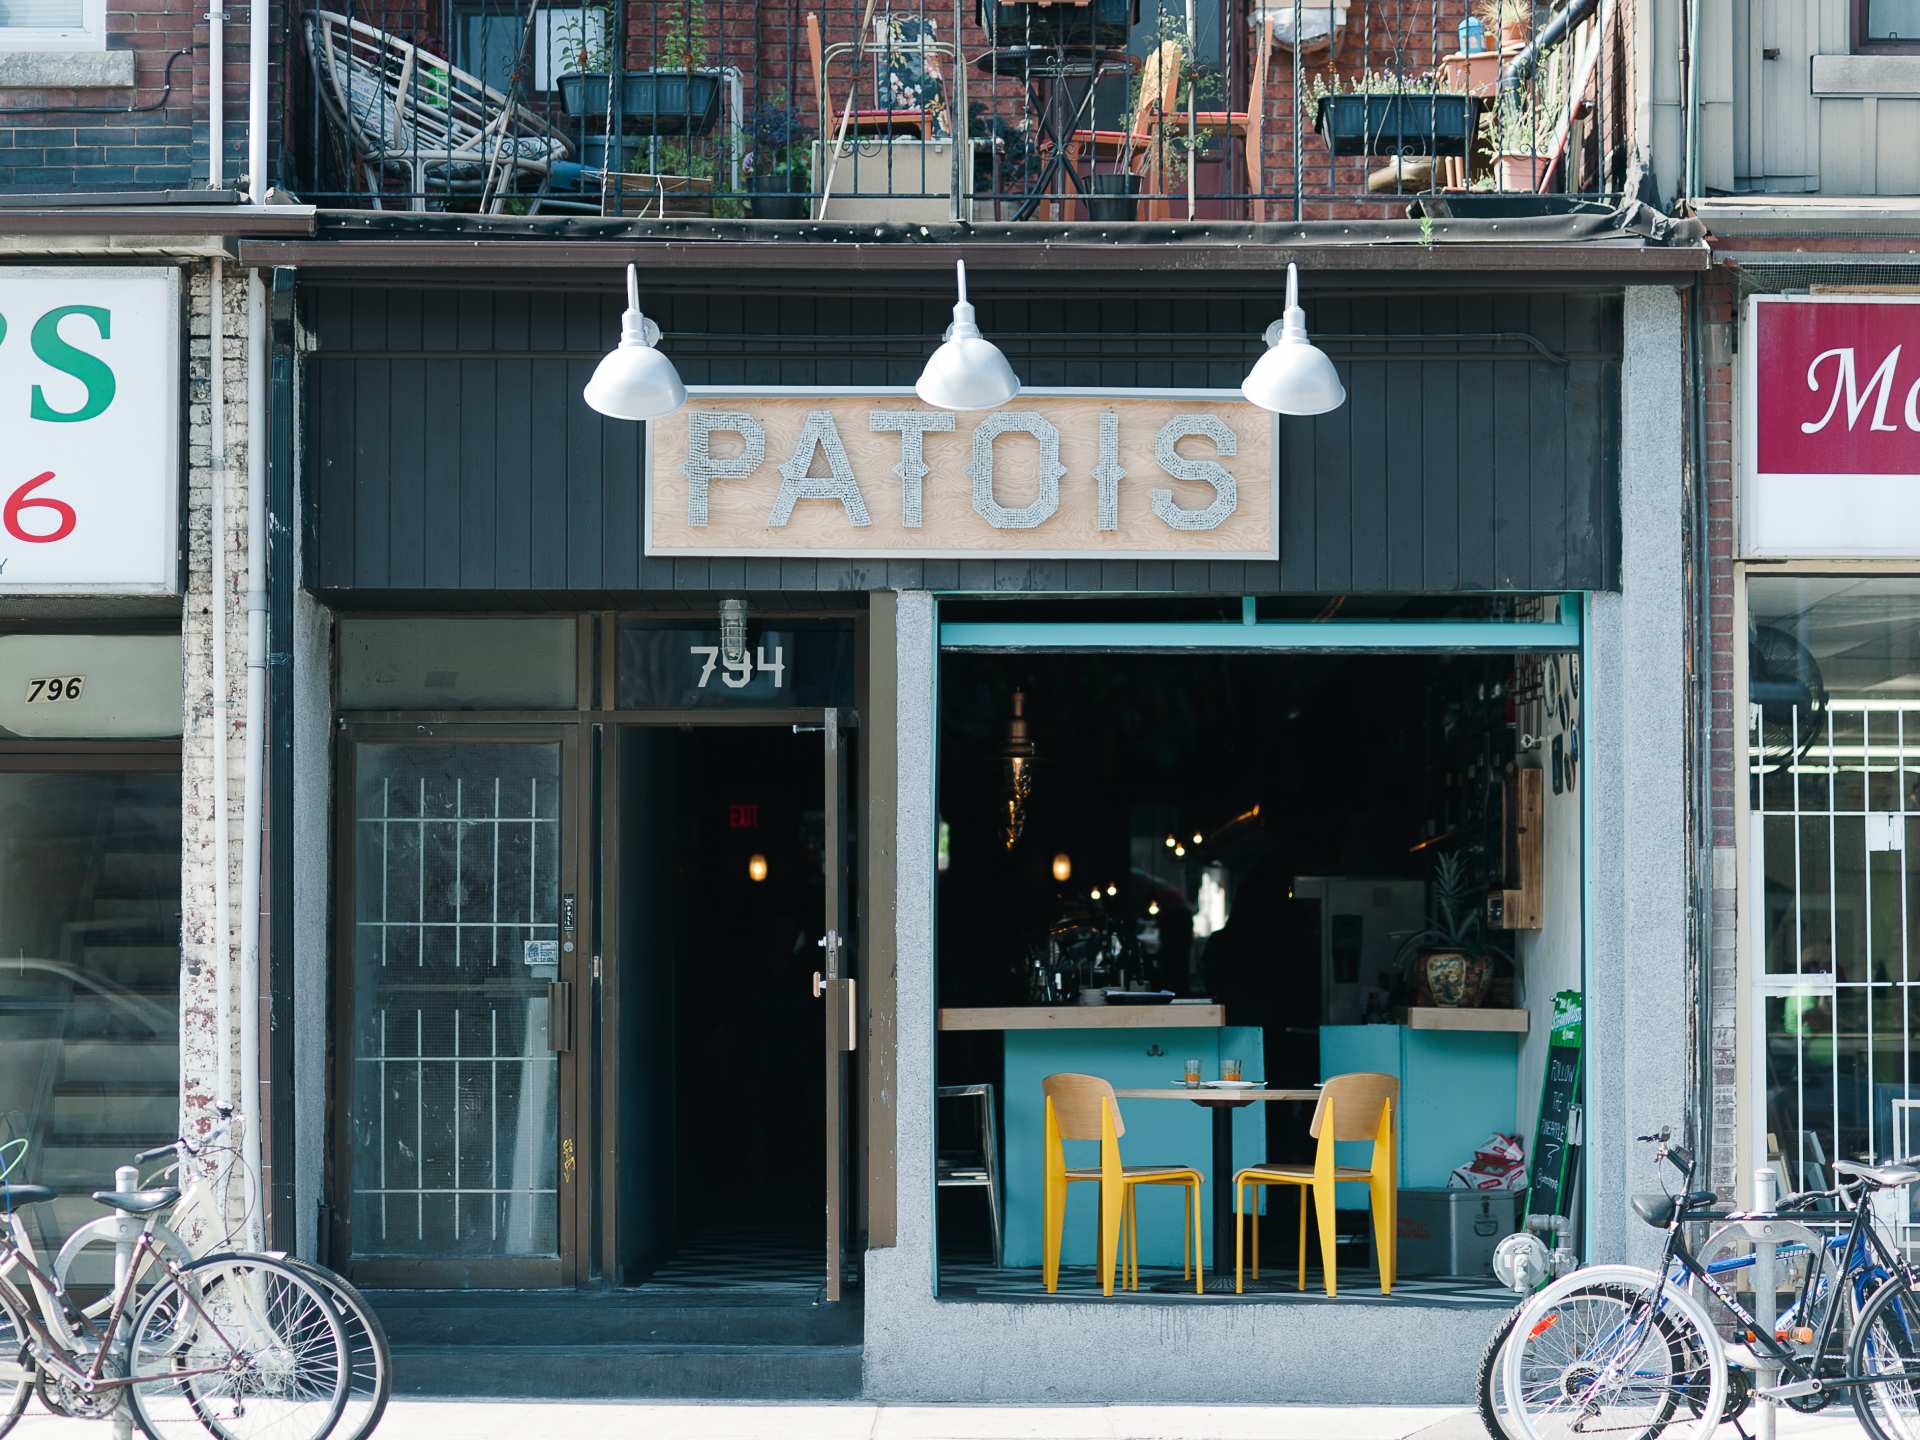 Best brunch in Toronto | The exterior of Patois on Dundas West